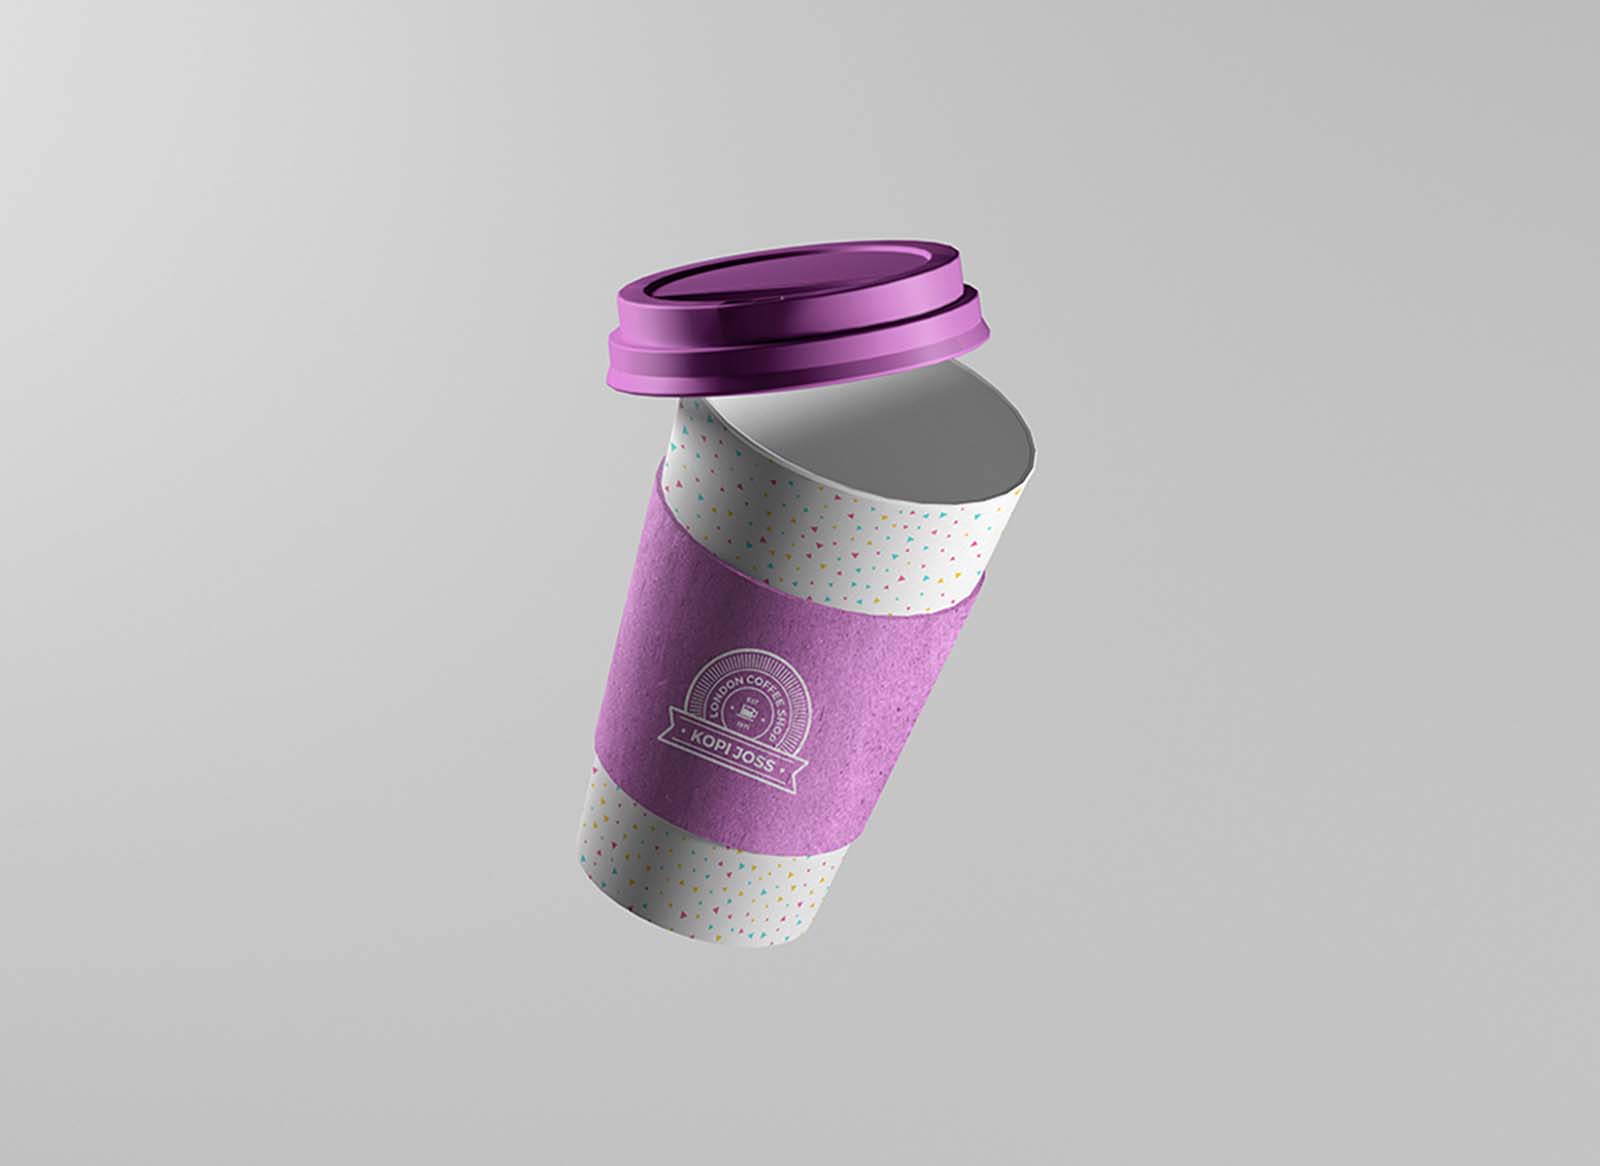 Typical Floating Coffee Cup Mockup